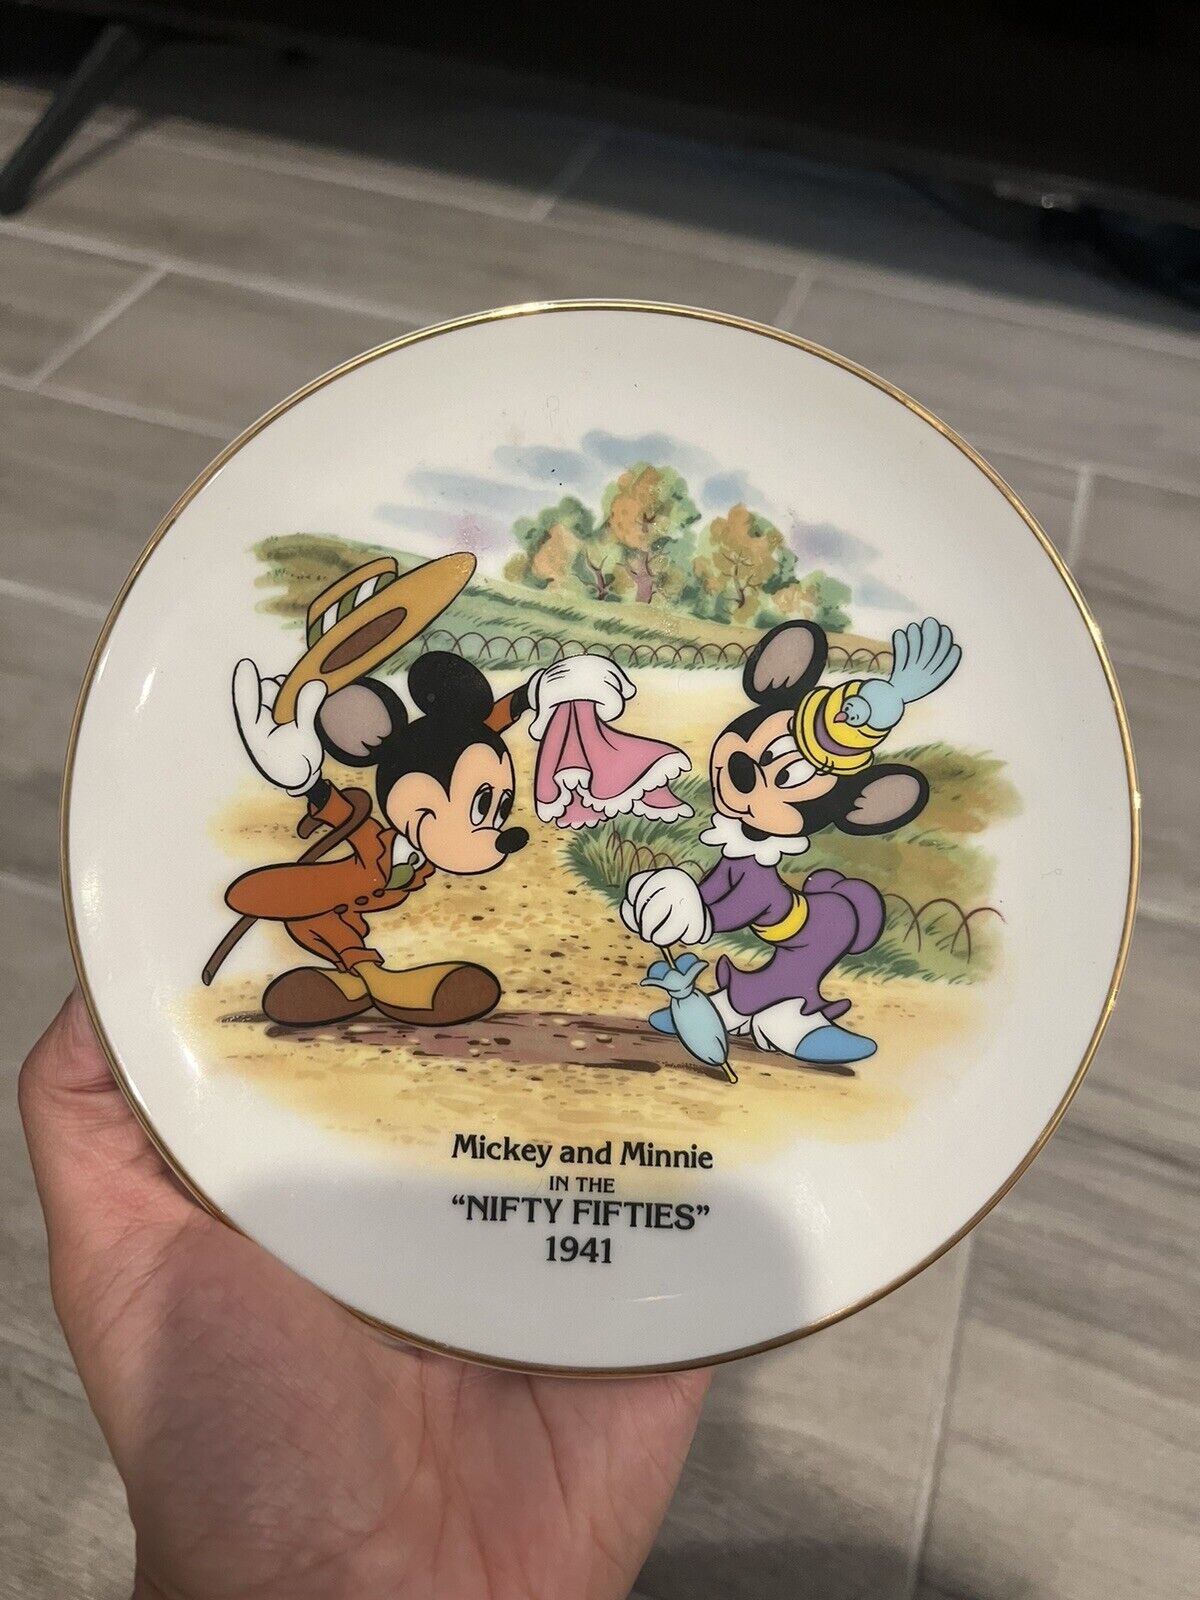 Disney Vintage Mickey Mouse Minnie Mouse “Nifty Fifties” Disney Parks Plate